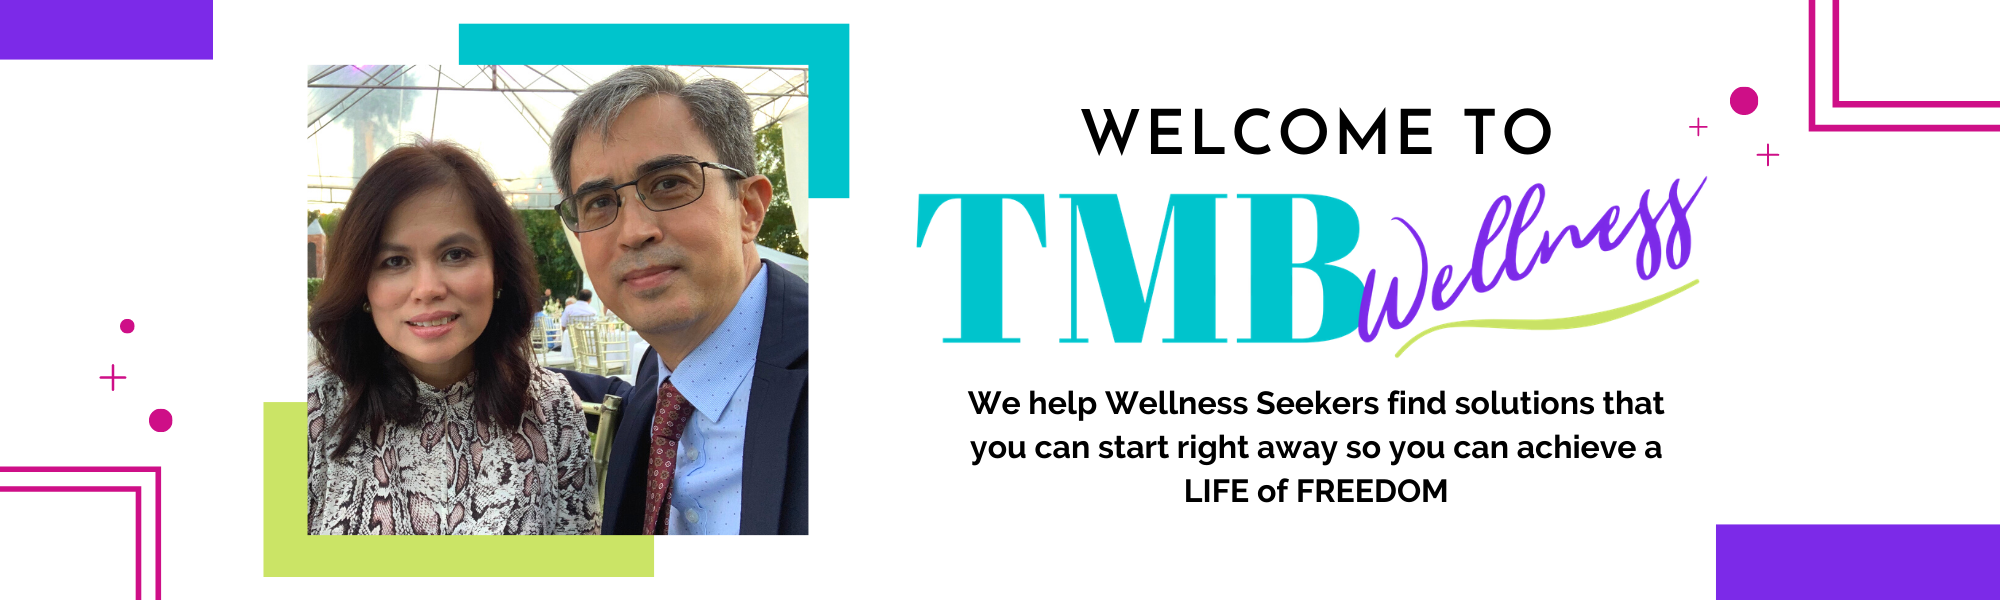 Welcome to TMB Wellness! We help wellness seekers find solutions that they can start right away so that you can achieve a life of freedom!